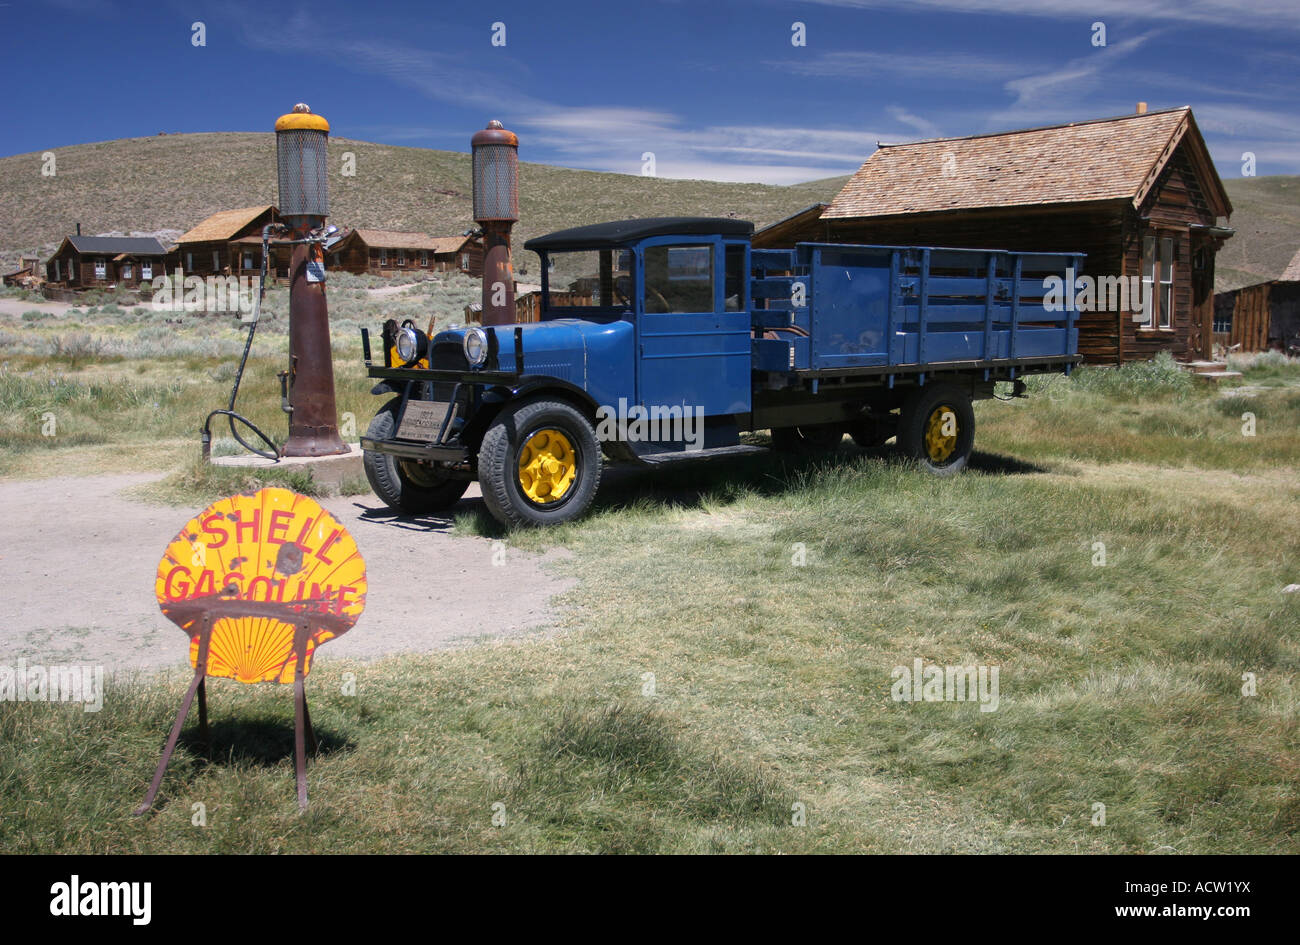 Dodge truck at abandoned gas station in Bodie Ghost Town, California, USA Stock Photo